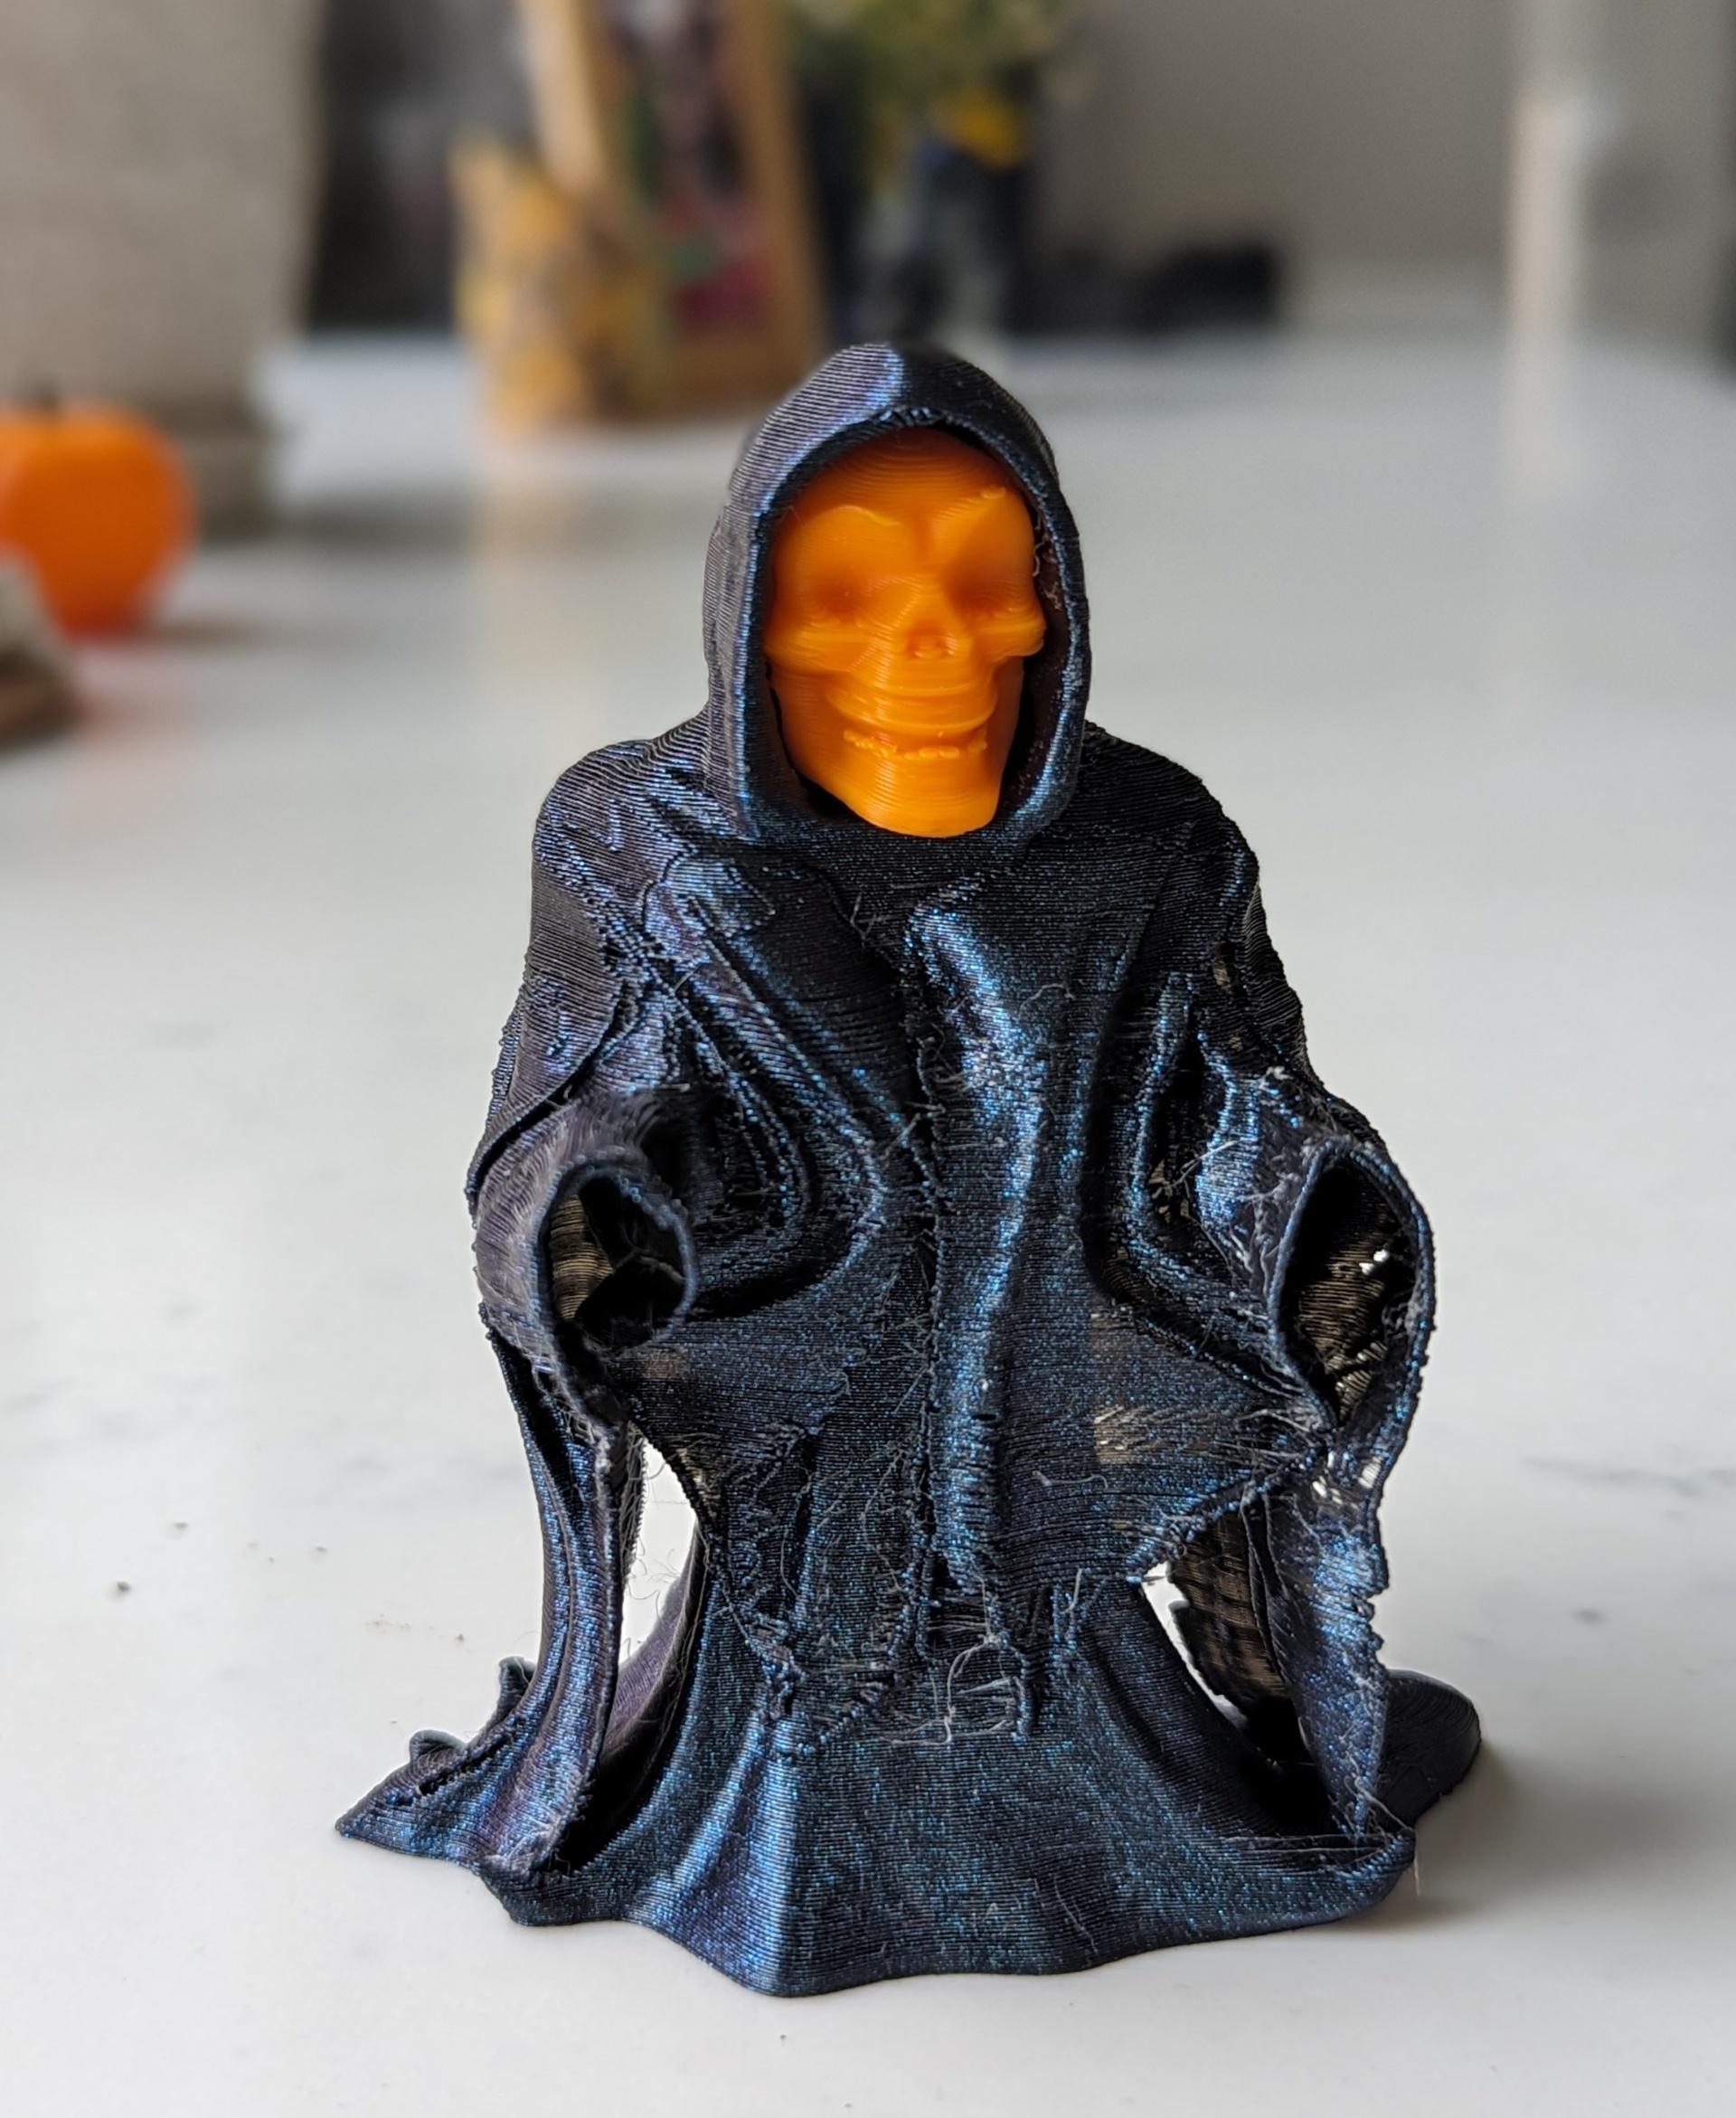 Grim Reaper, Slim Reaper - Articulated Snap-Flex Fidget (Medium Tightness Joints) - Came out a bit thin and stringy, but made for a cool effect with the robe - 3d model